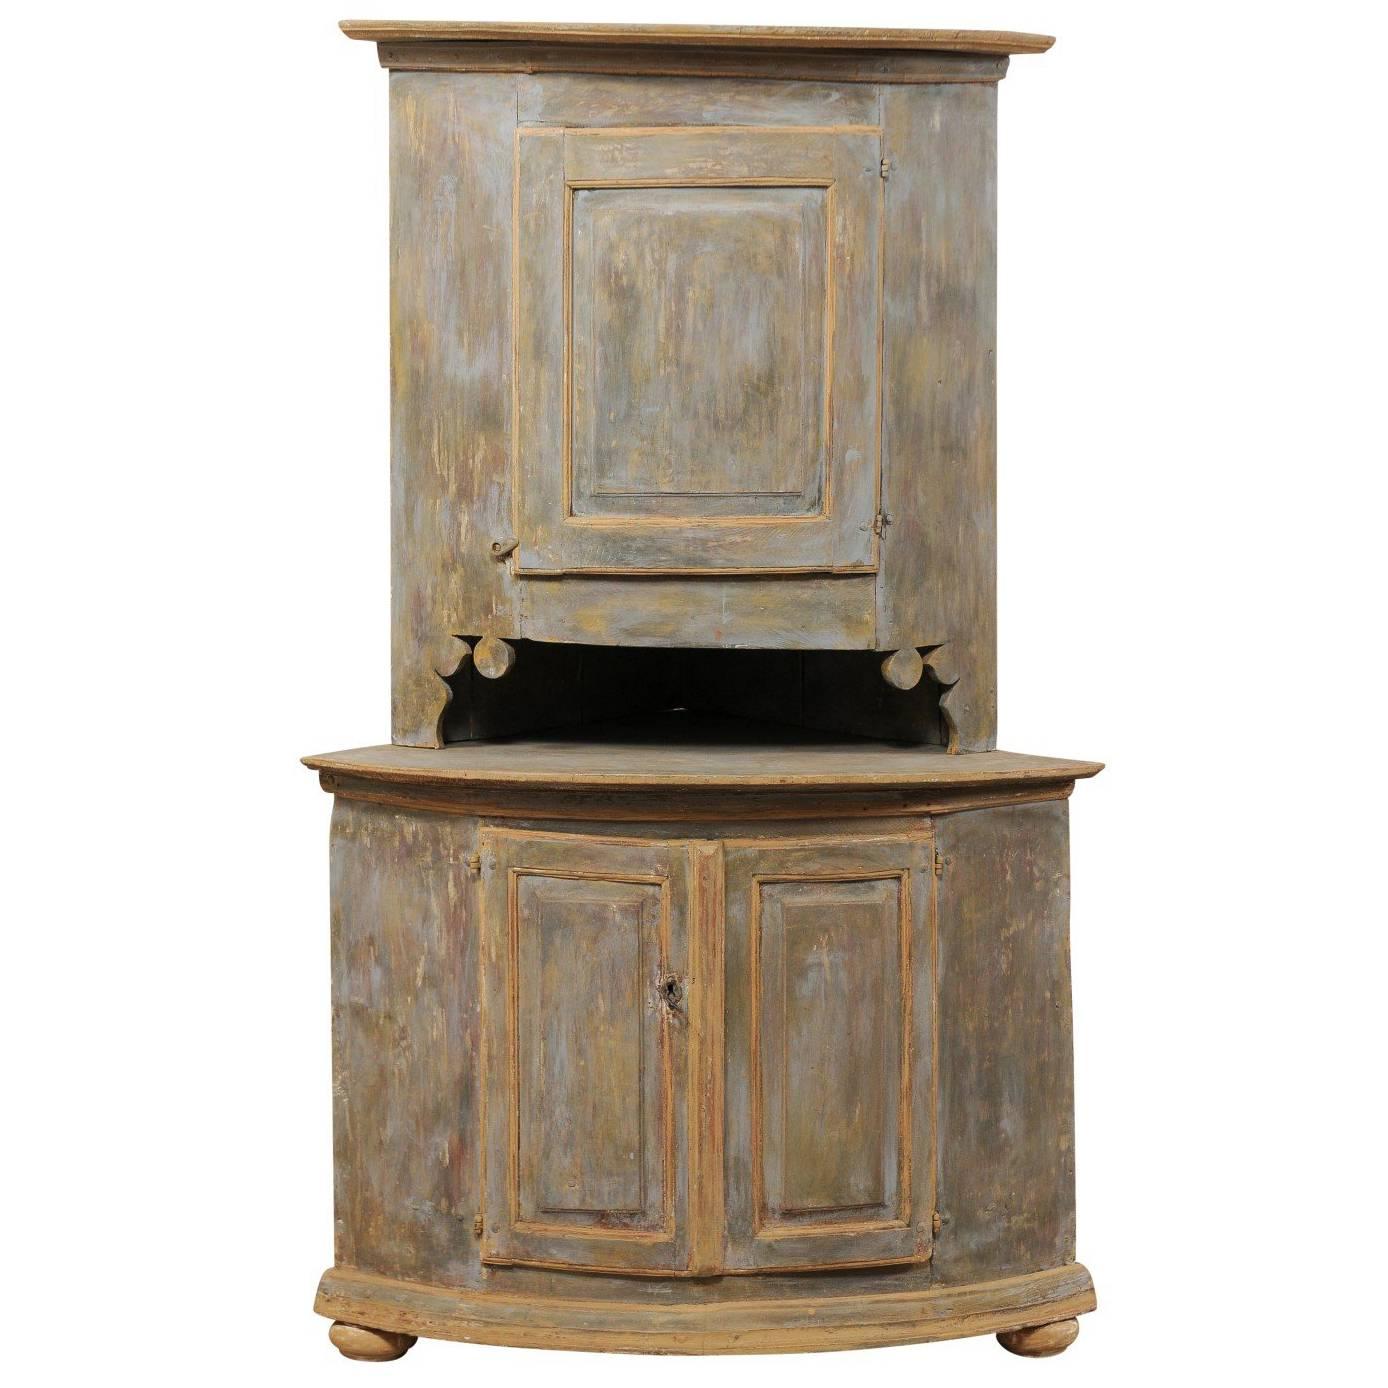 19th Century Swedish Painted Wood Corner Cabinet with Nicely Carved Details